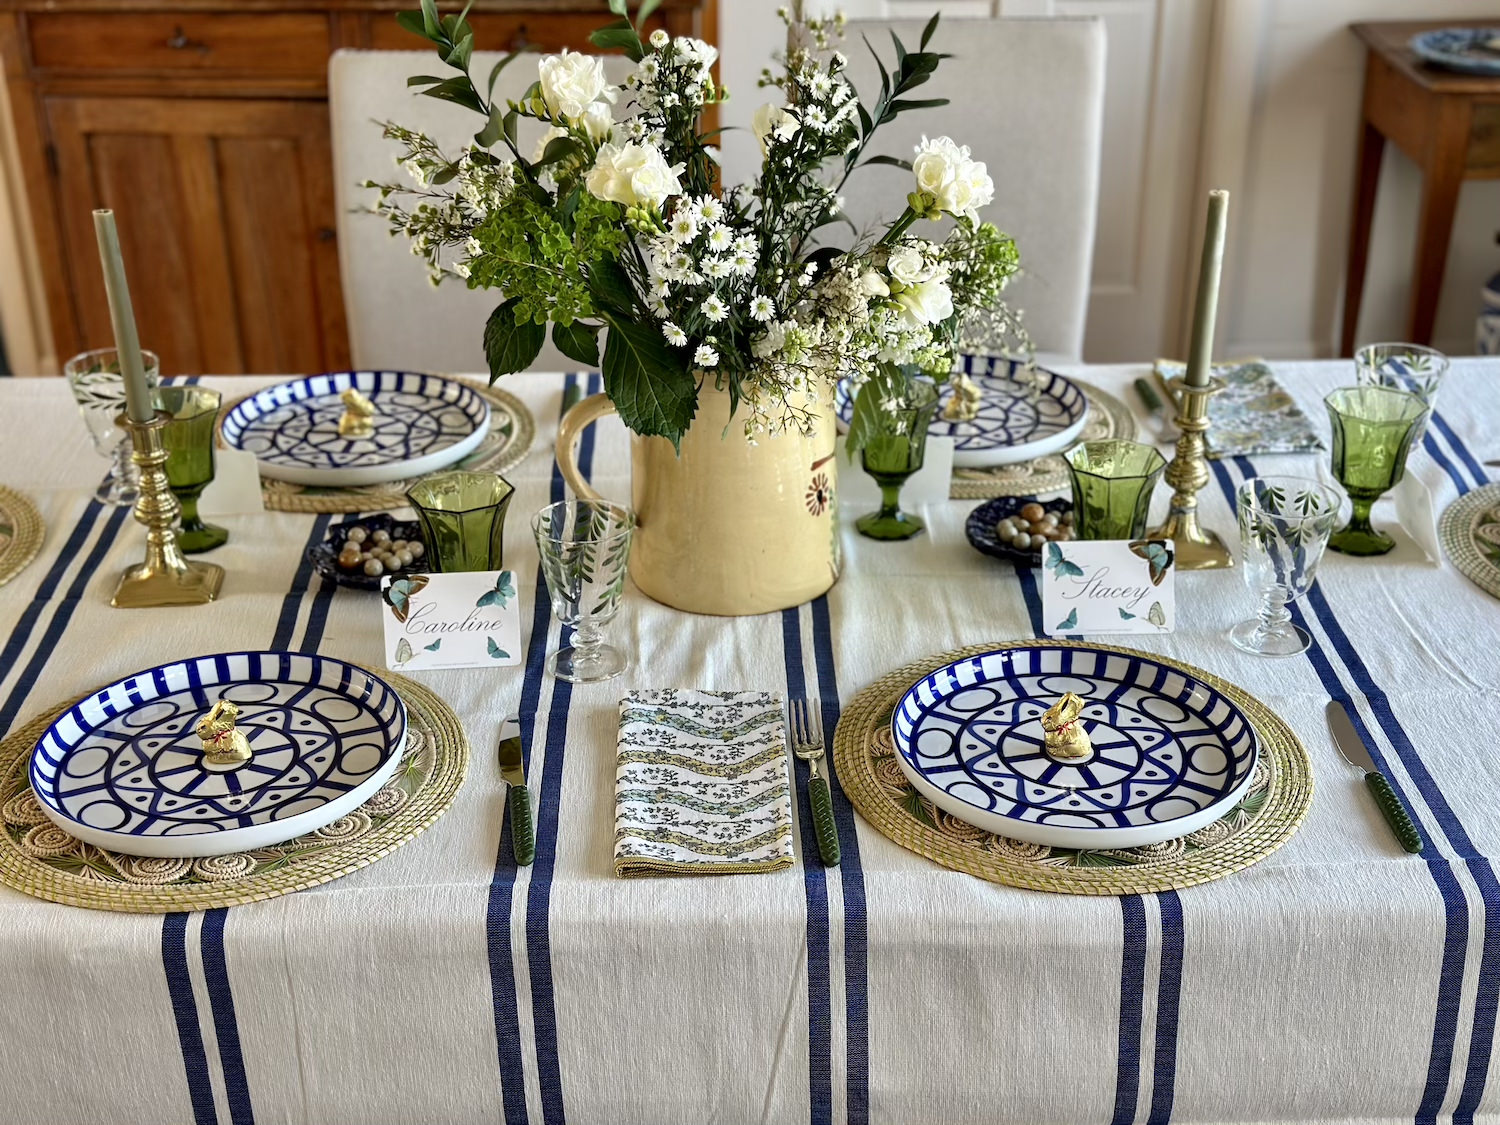 Easter table via Stacey Bewkes of Quintessence-1